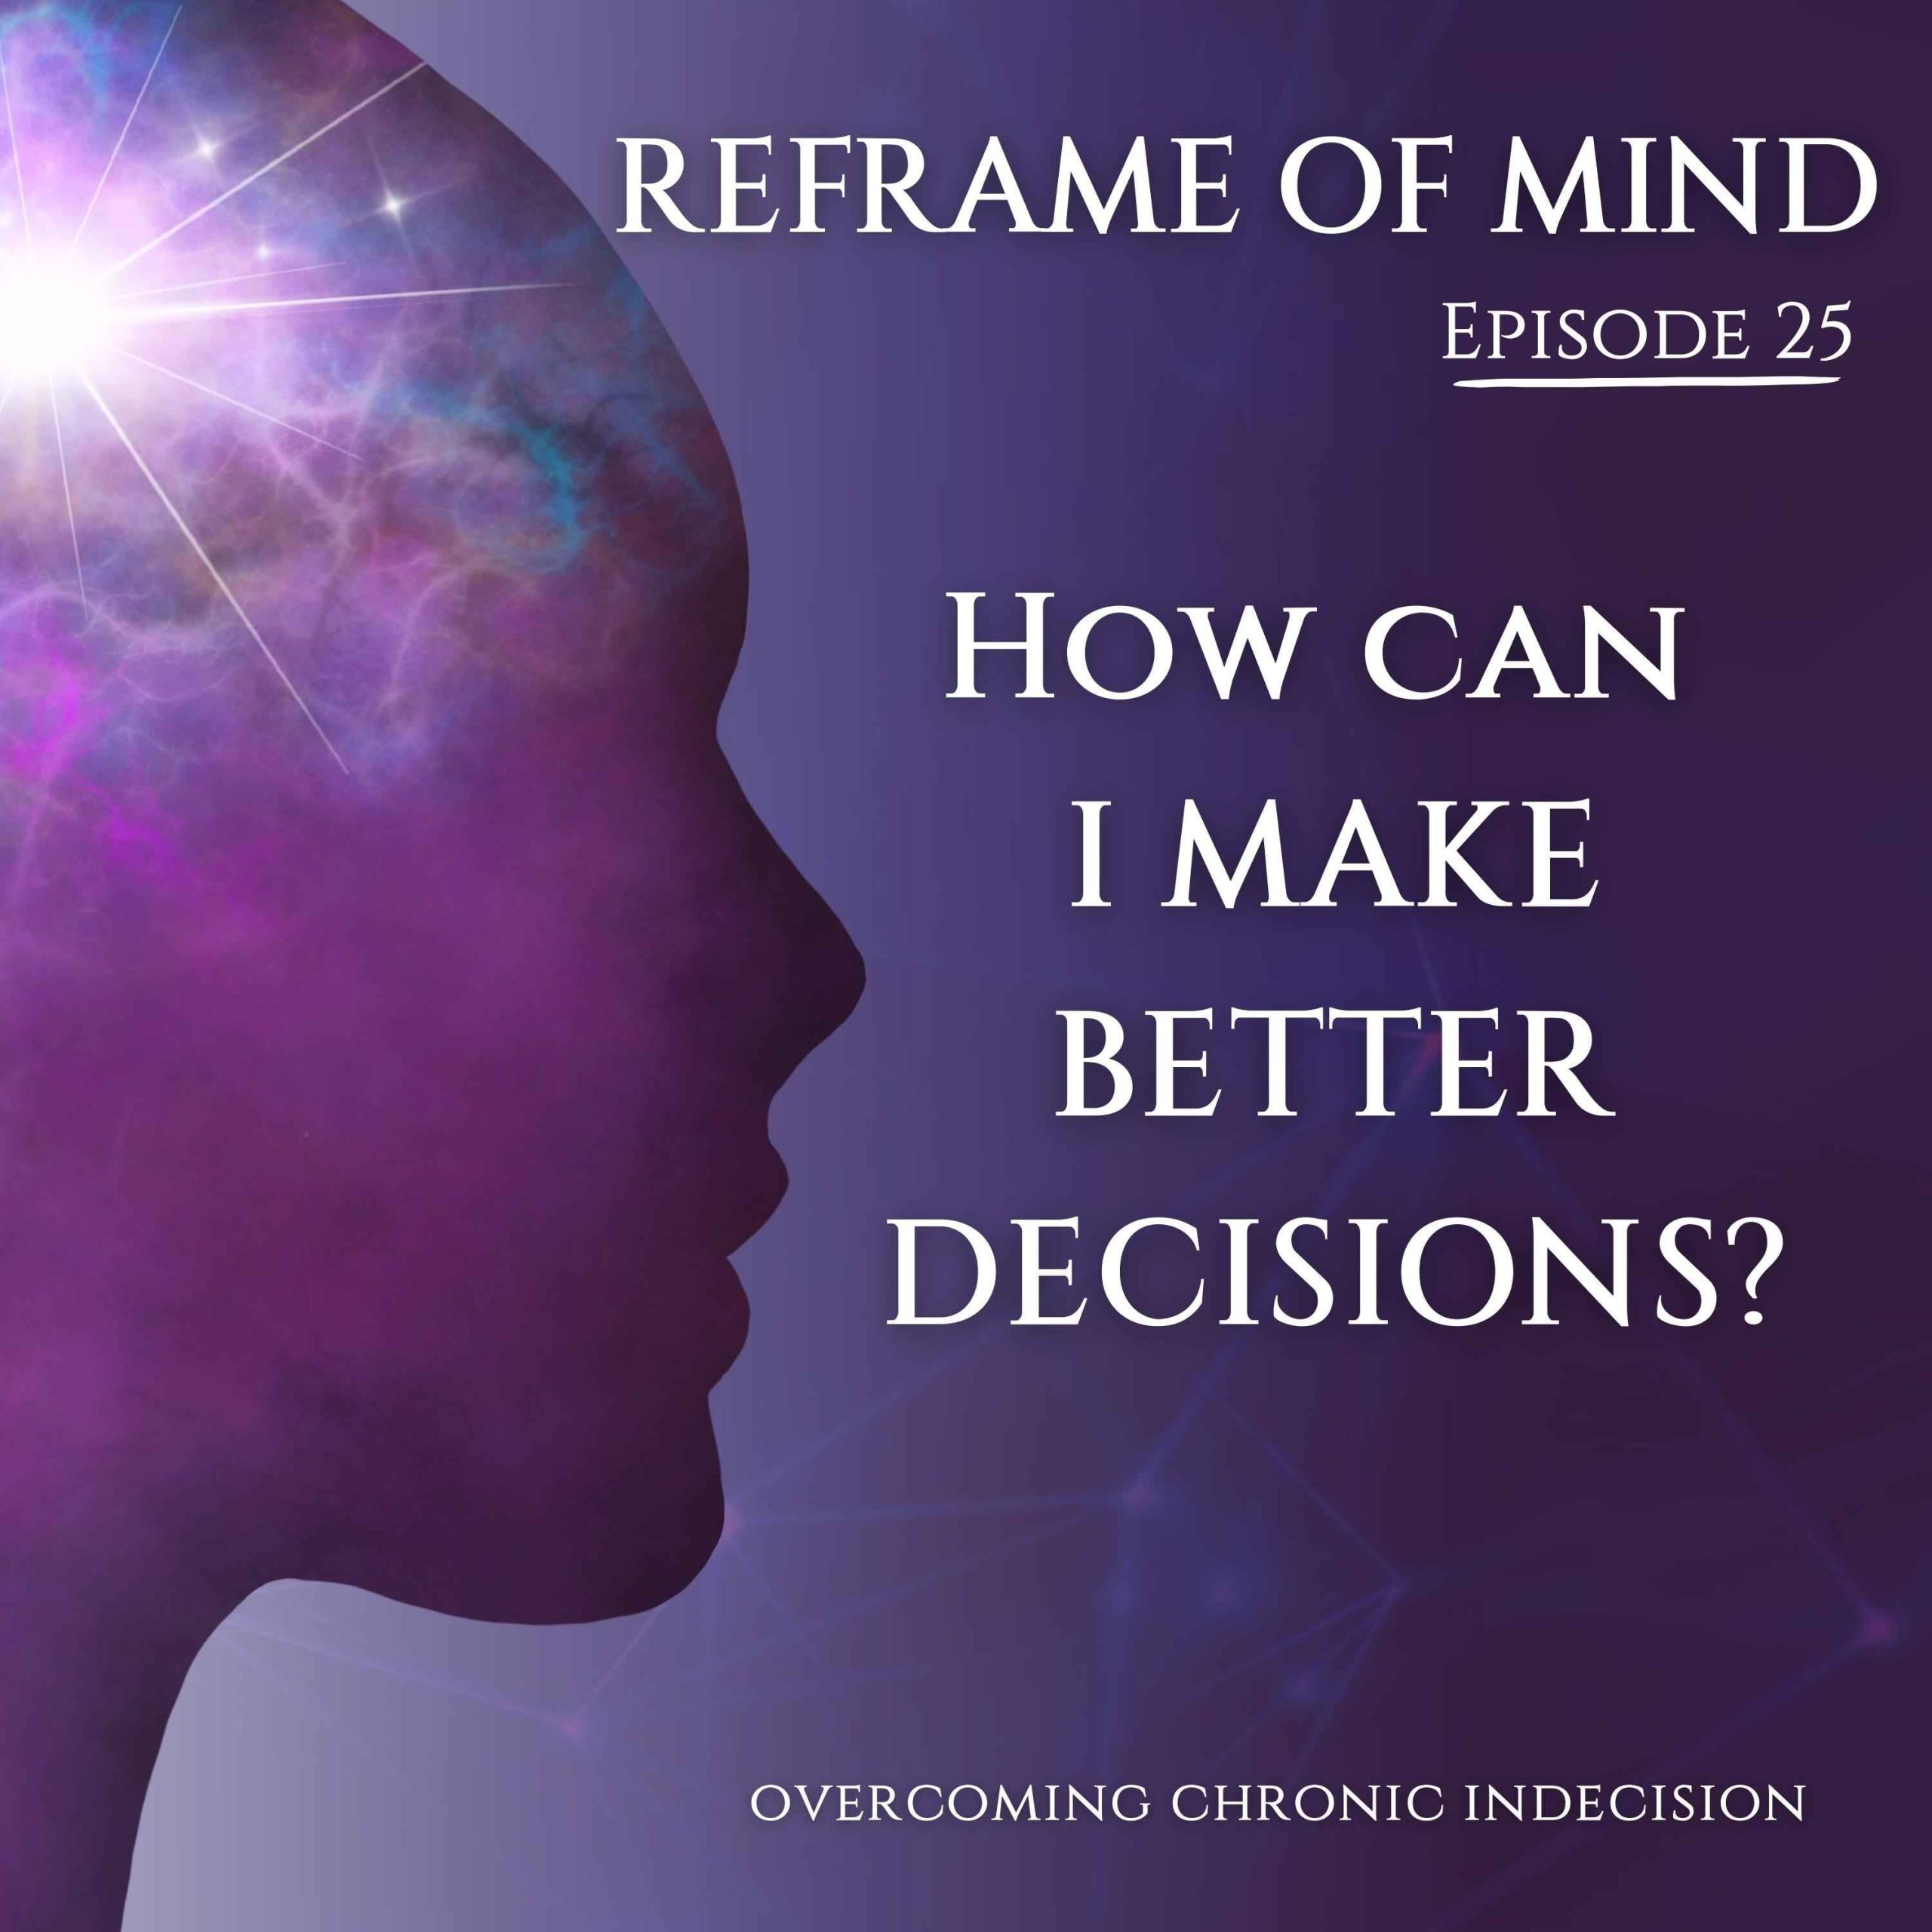 How can I make better decisions?